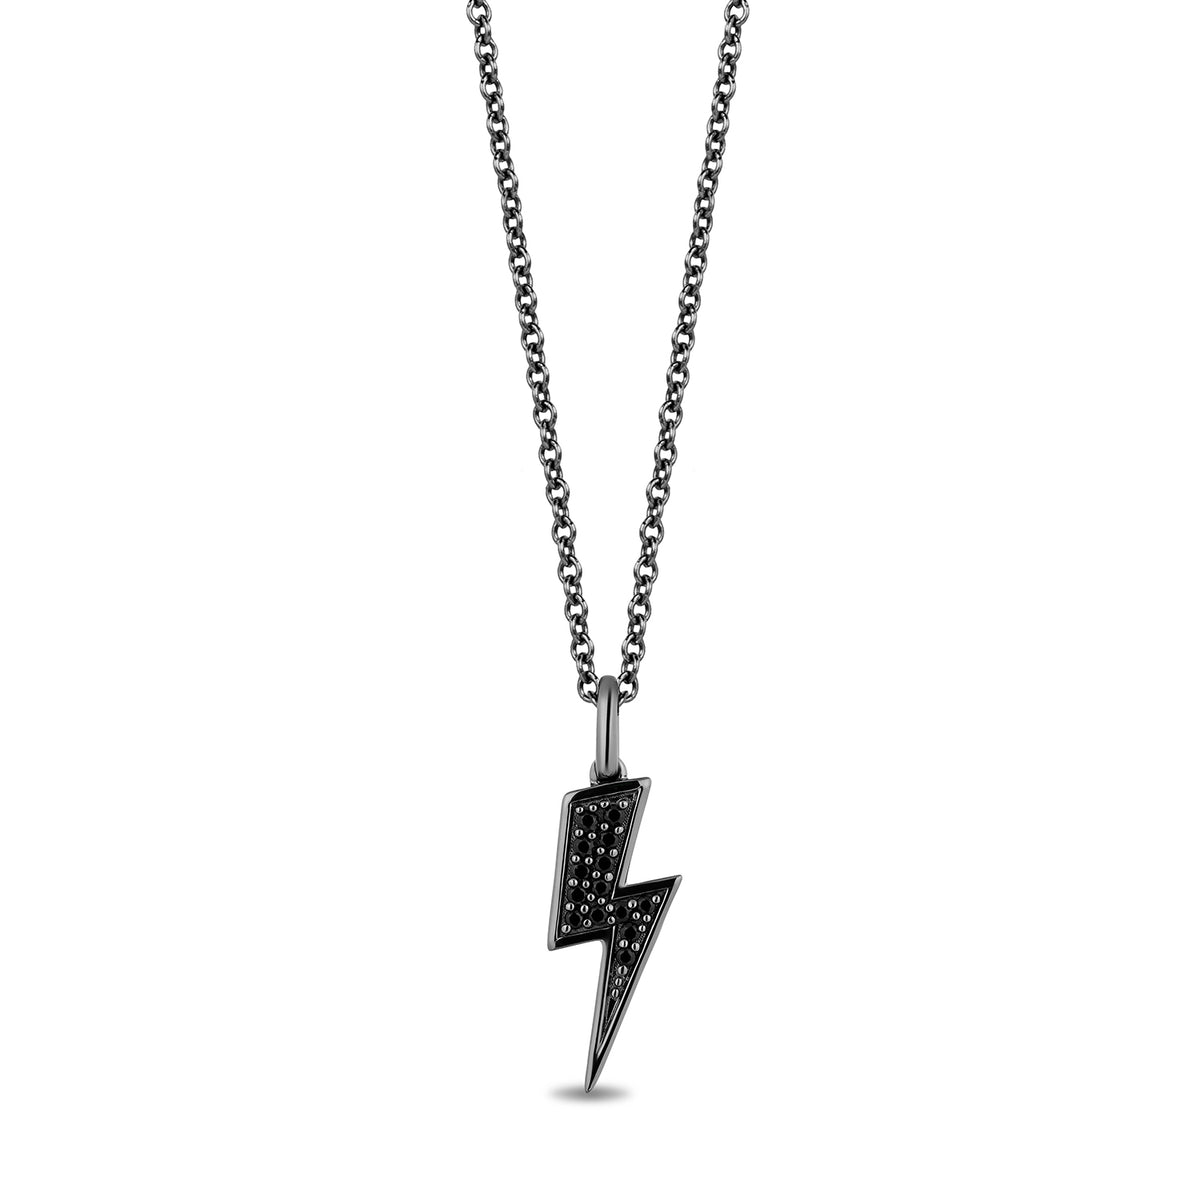 Buy Lightning Bolt Necklace, Sterling Silver Personalized Gift Jewelry,  Sterling Silver Curb Chain and Pendant Online in India - Etsy